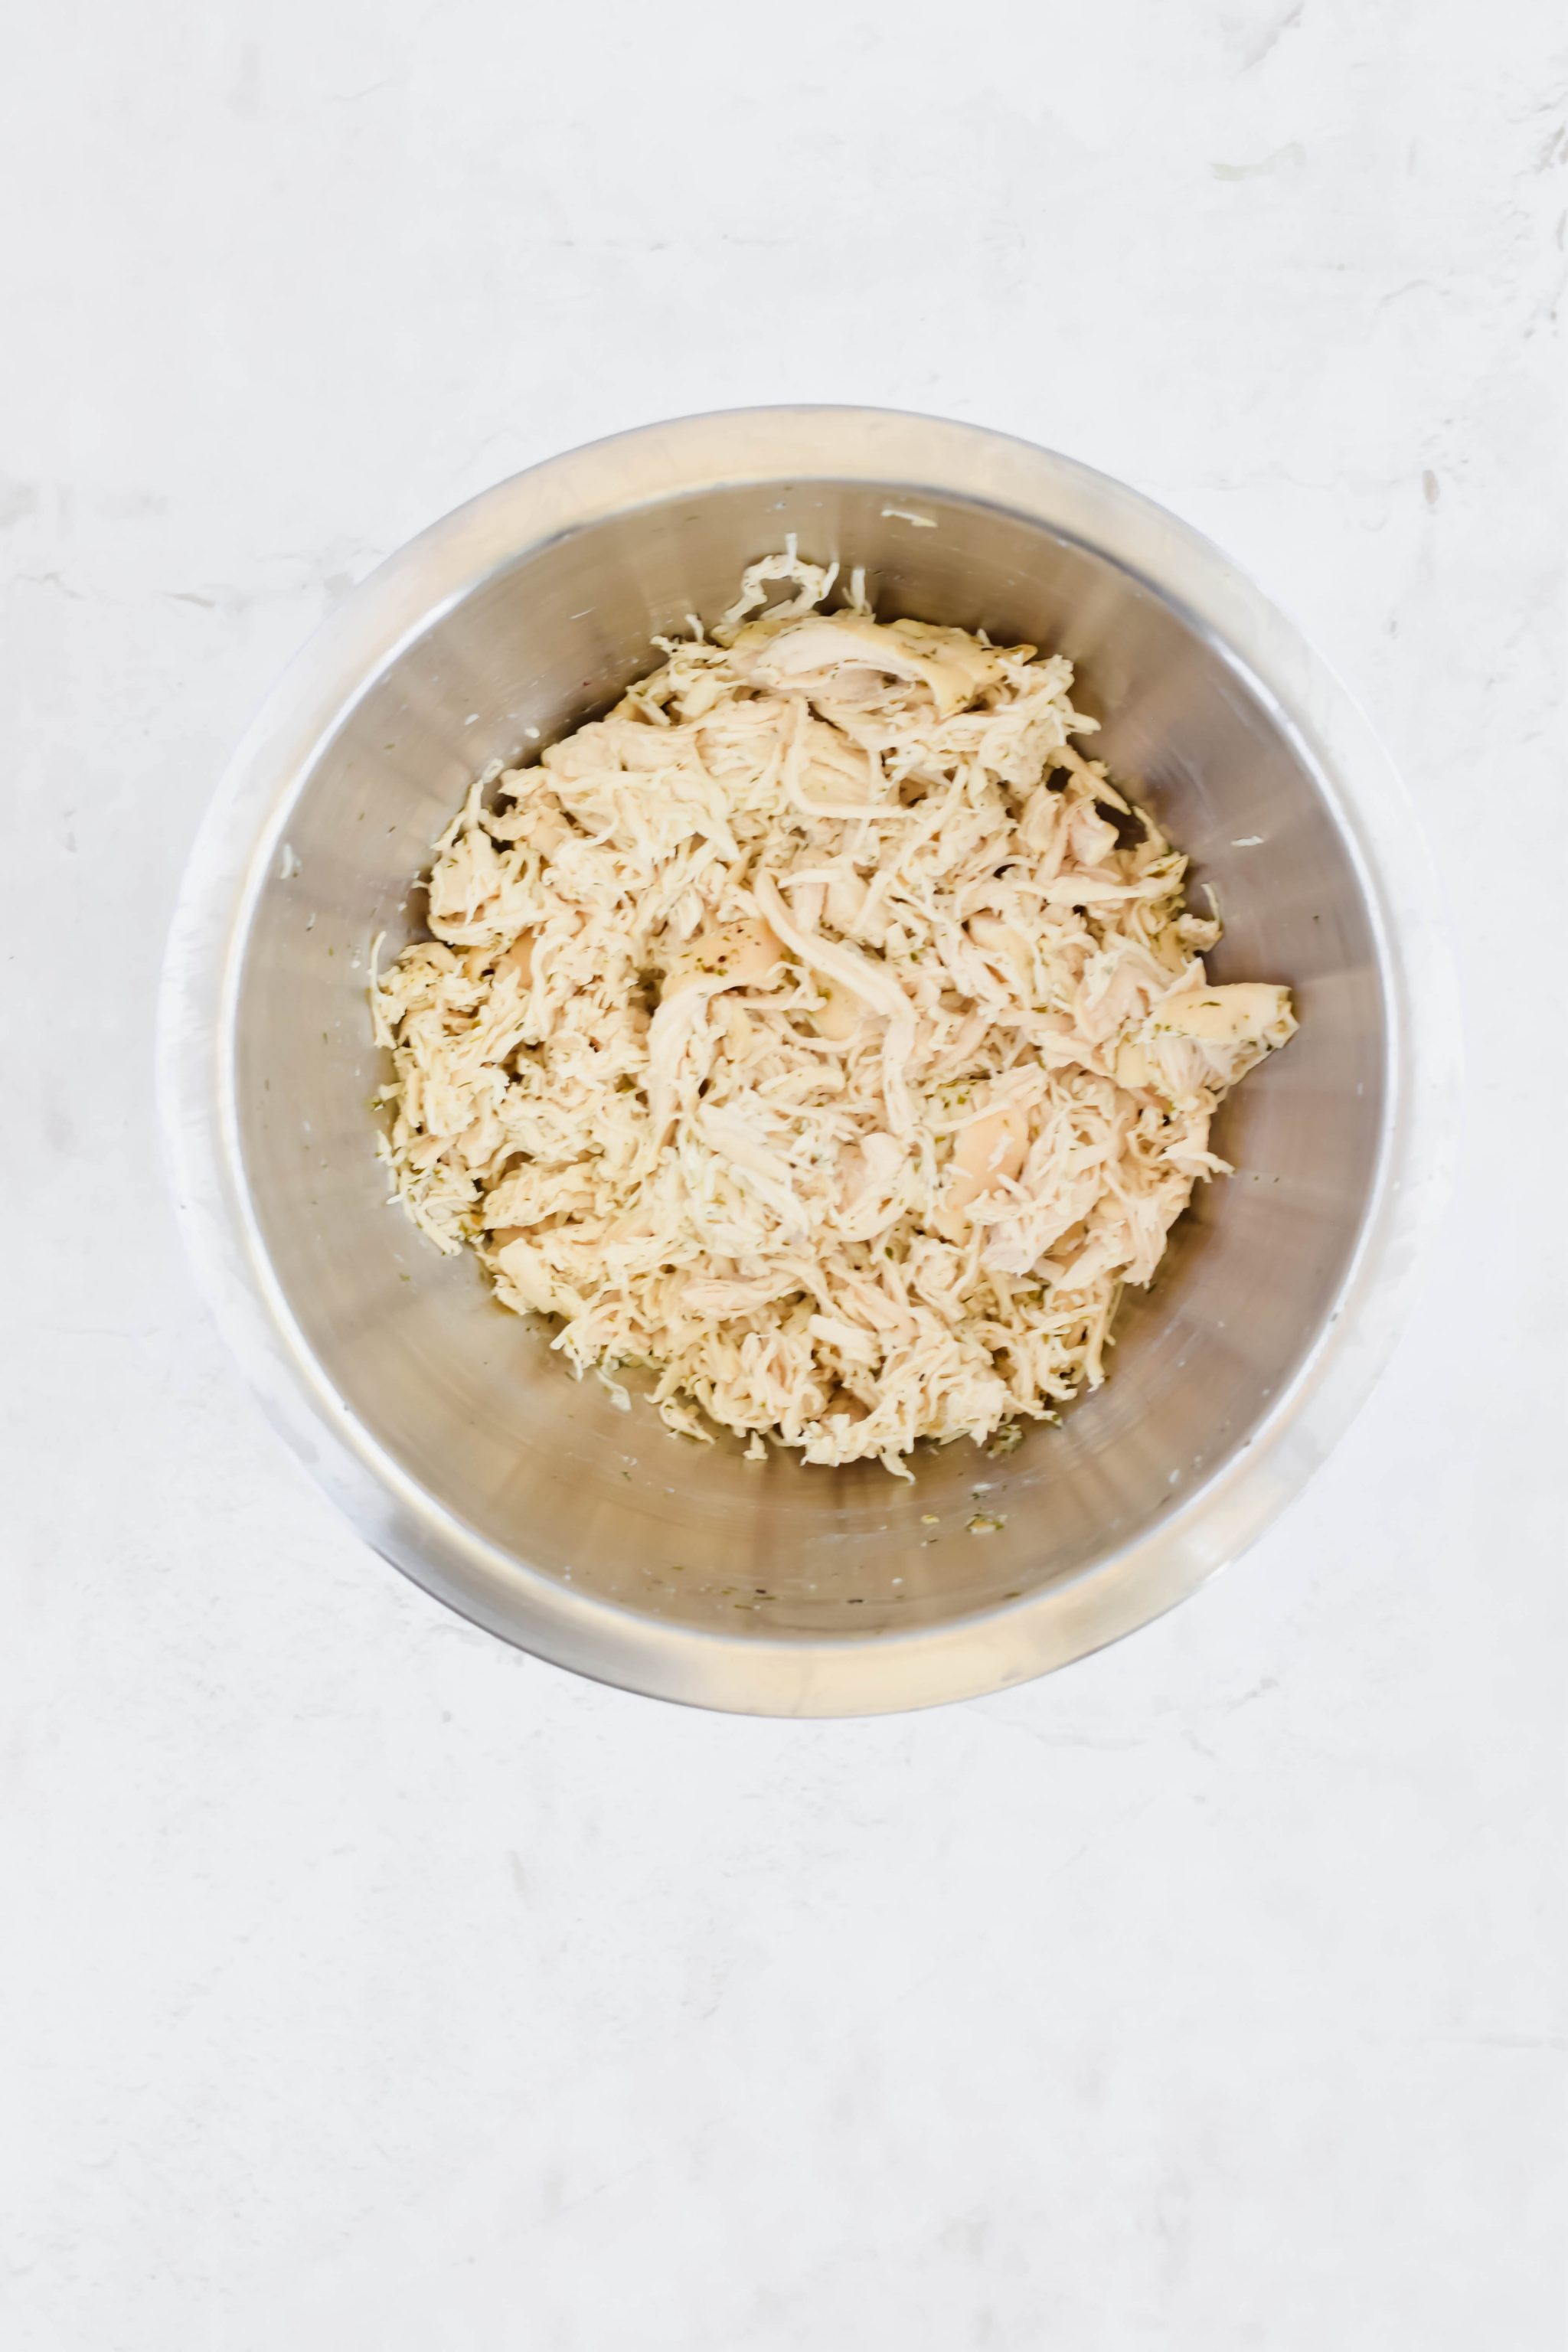 Shredded chicken in a metal mixing bowl